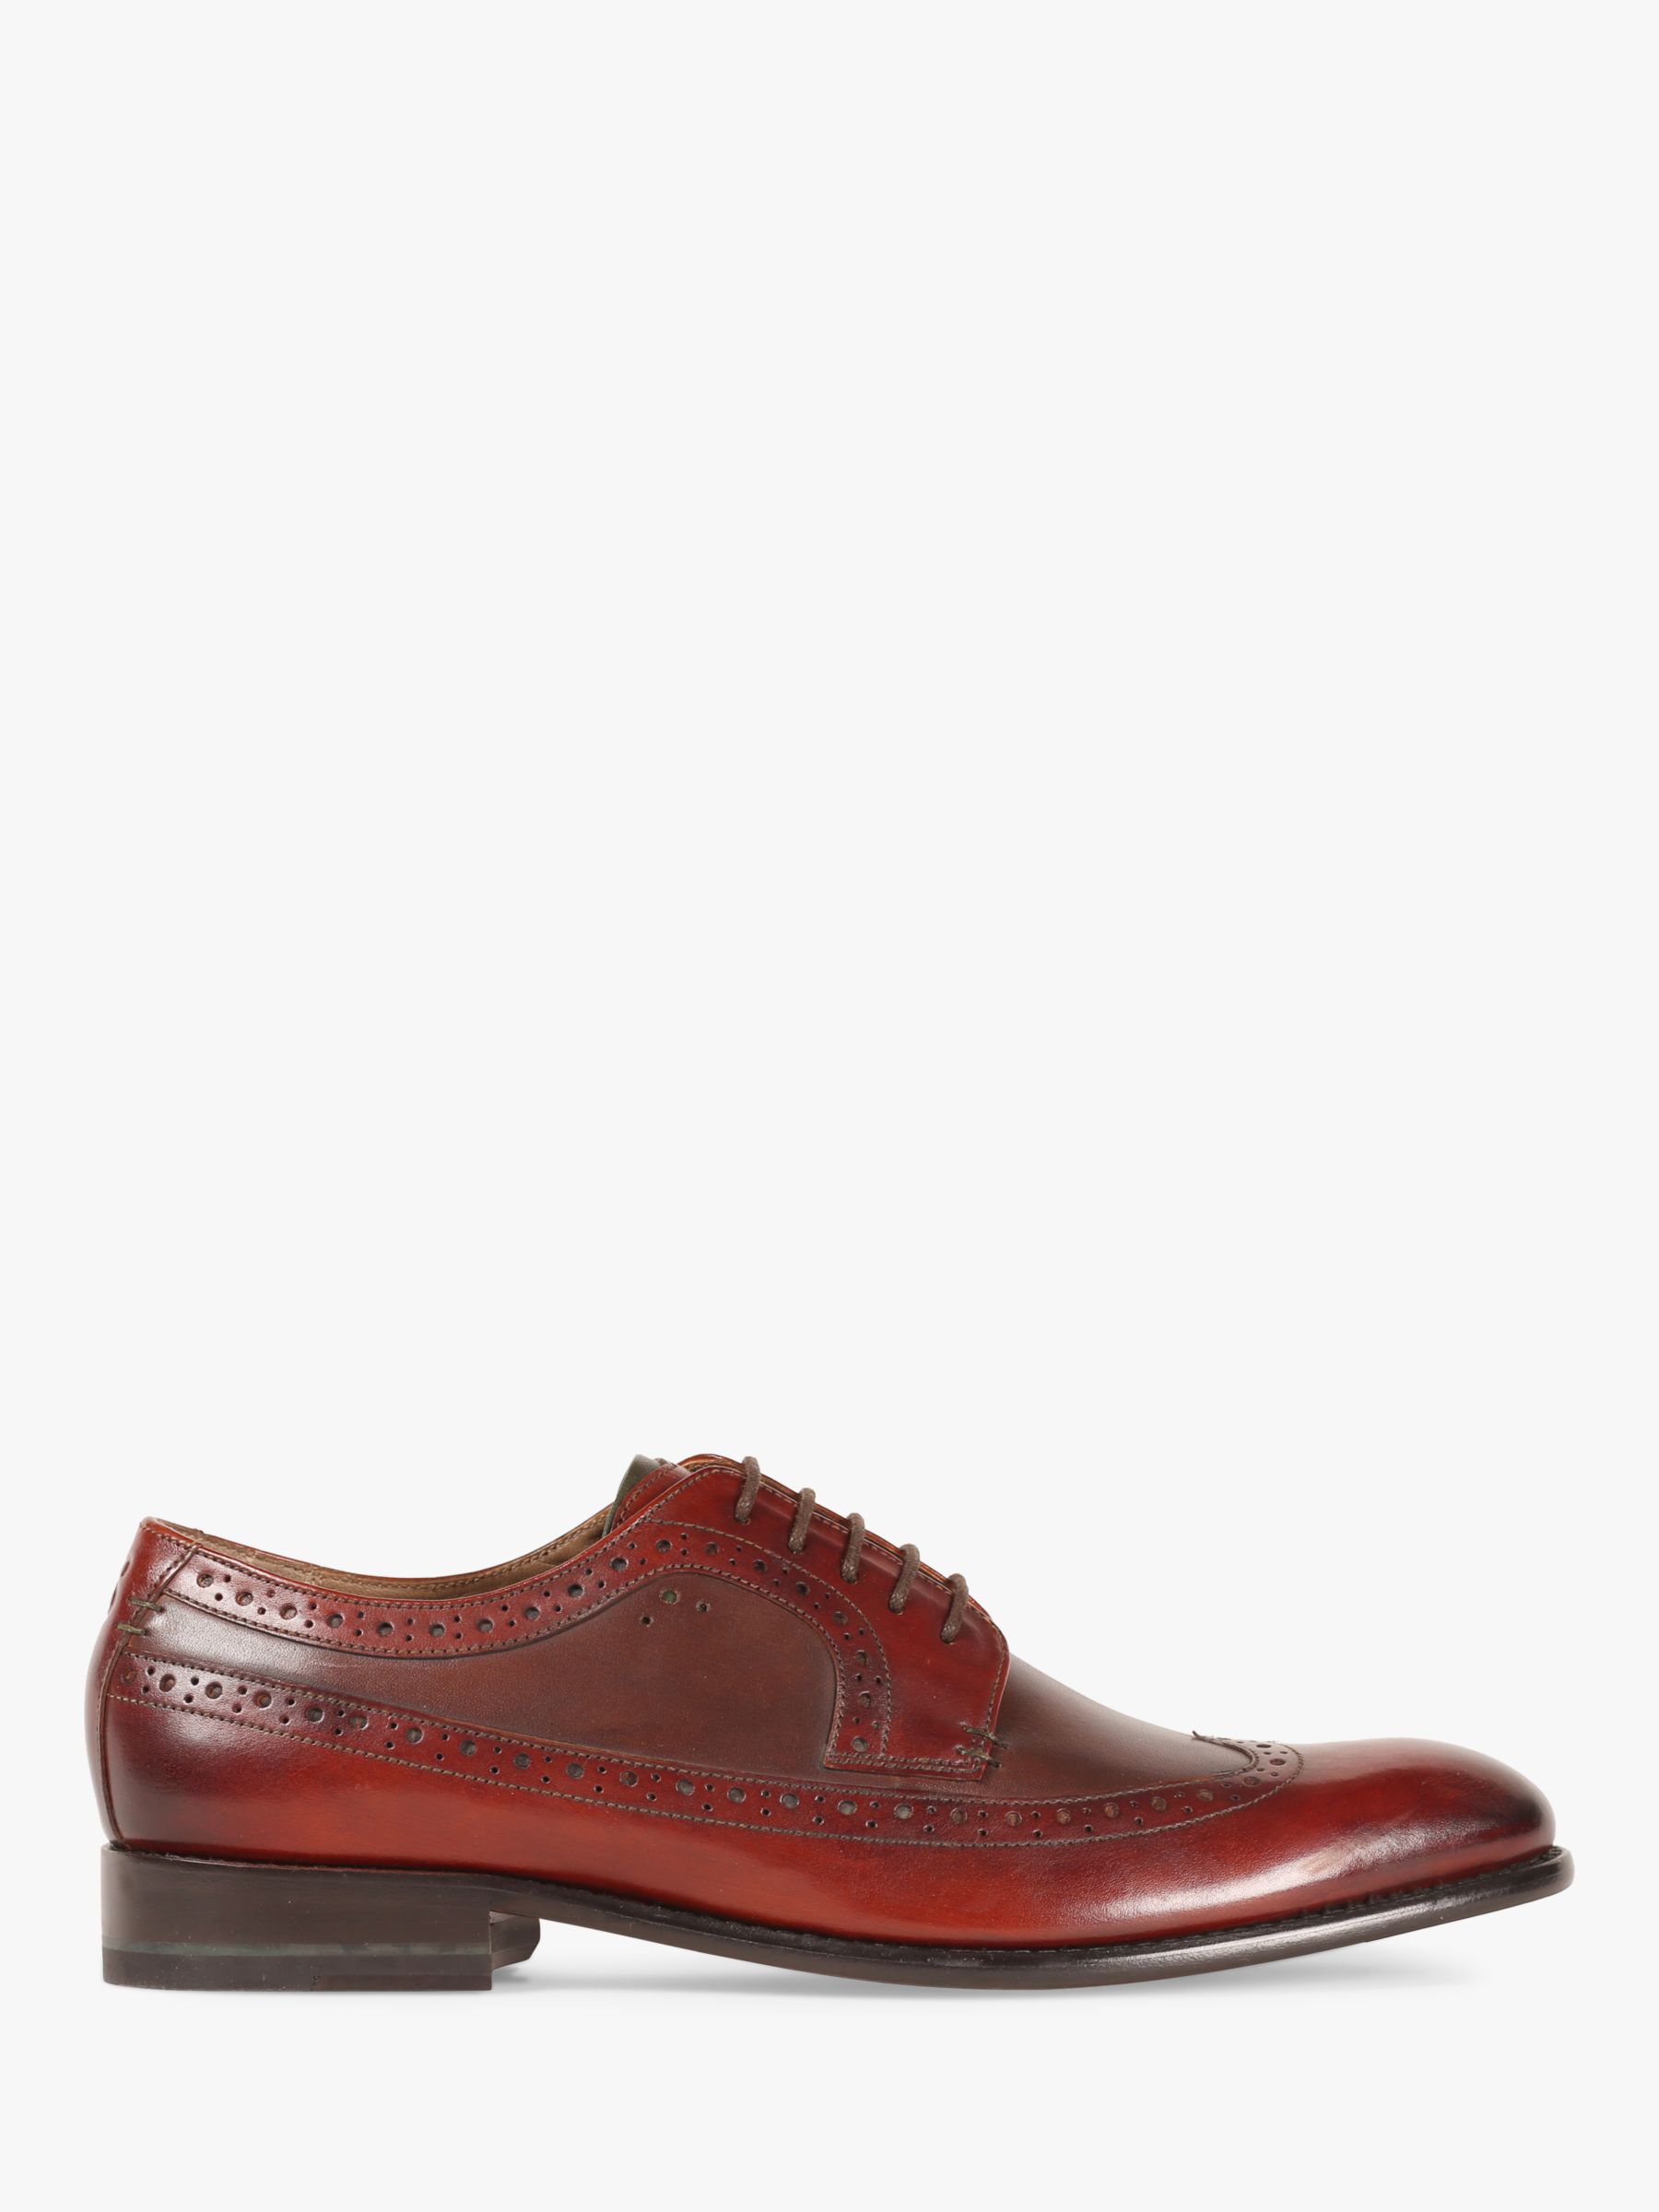 Oliver Sweeney Endellion Leather Brogues, Tan/Brown